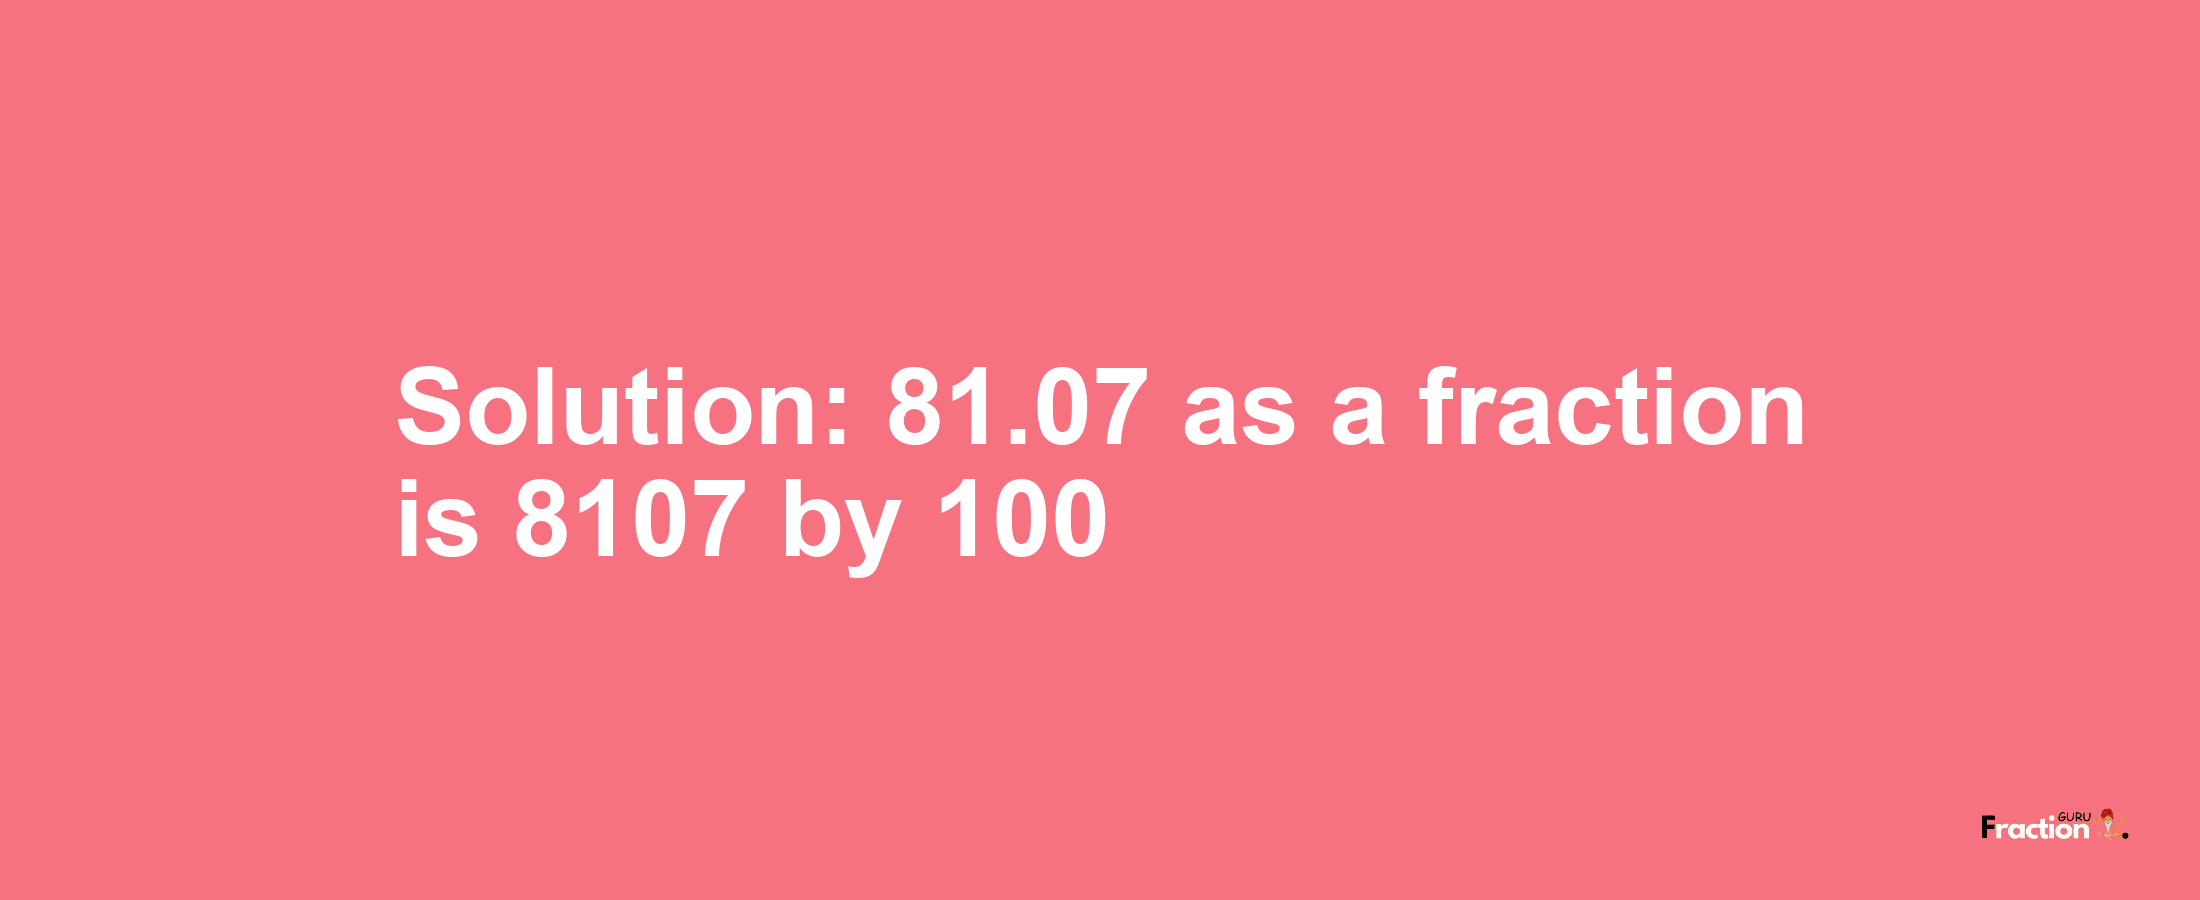 Solution:81.07 as a fraction is 8107/100